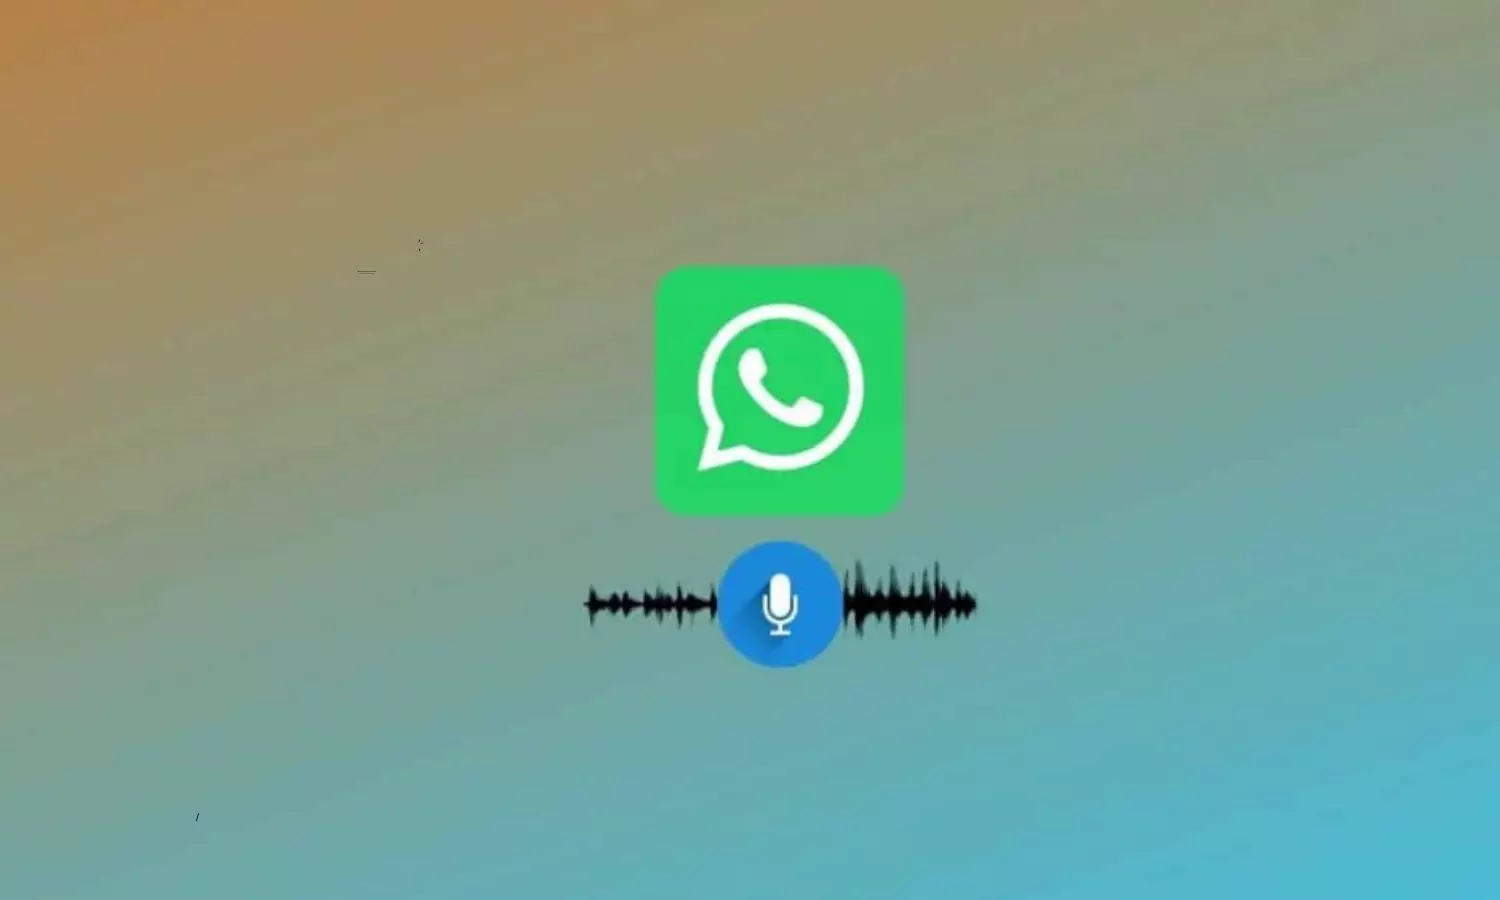 WhatsApp Working on New Feature That can Convert Voice to Text